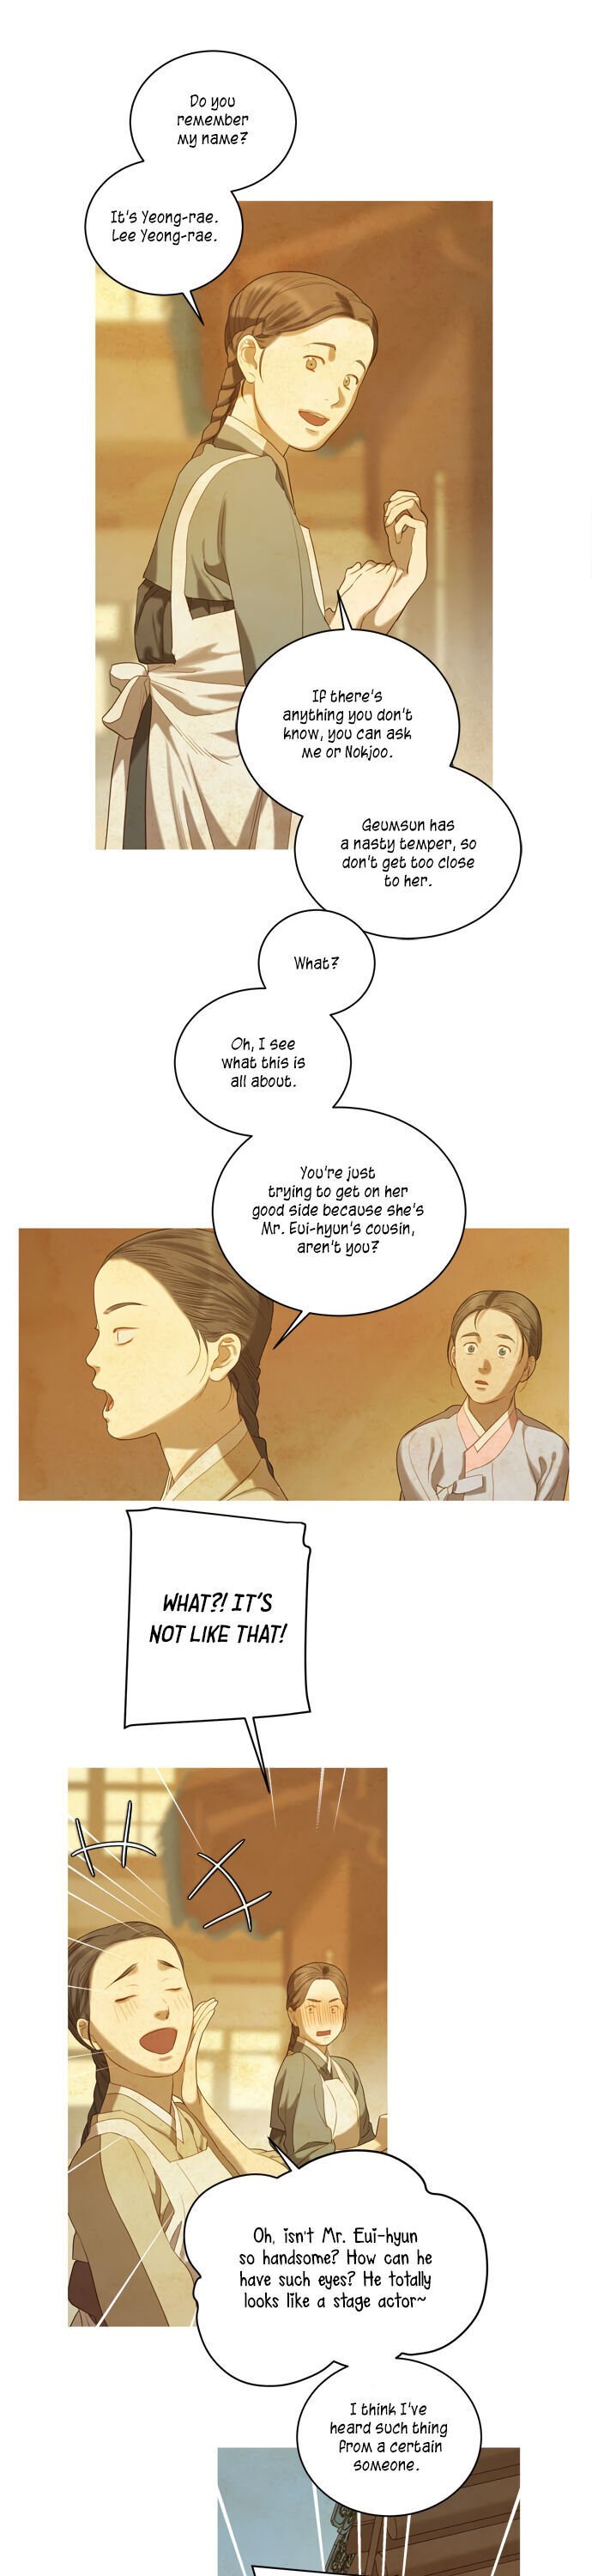 Gorae Byul - The Gyeongseong Mermaid - Chapter 32 Page 11